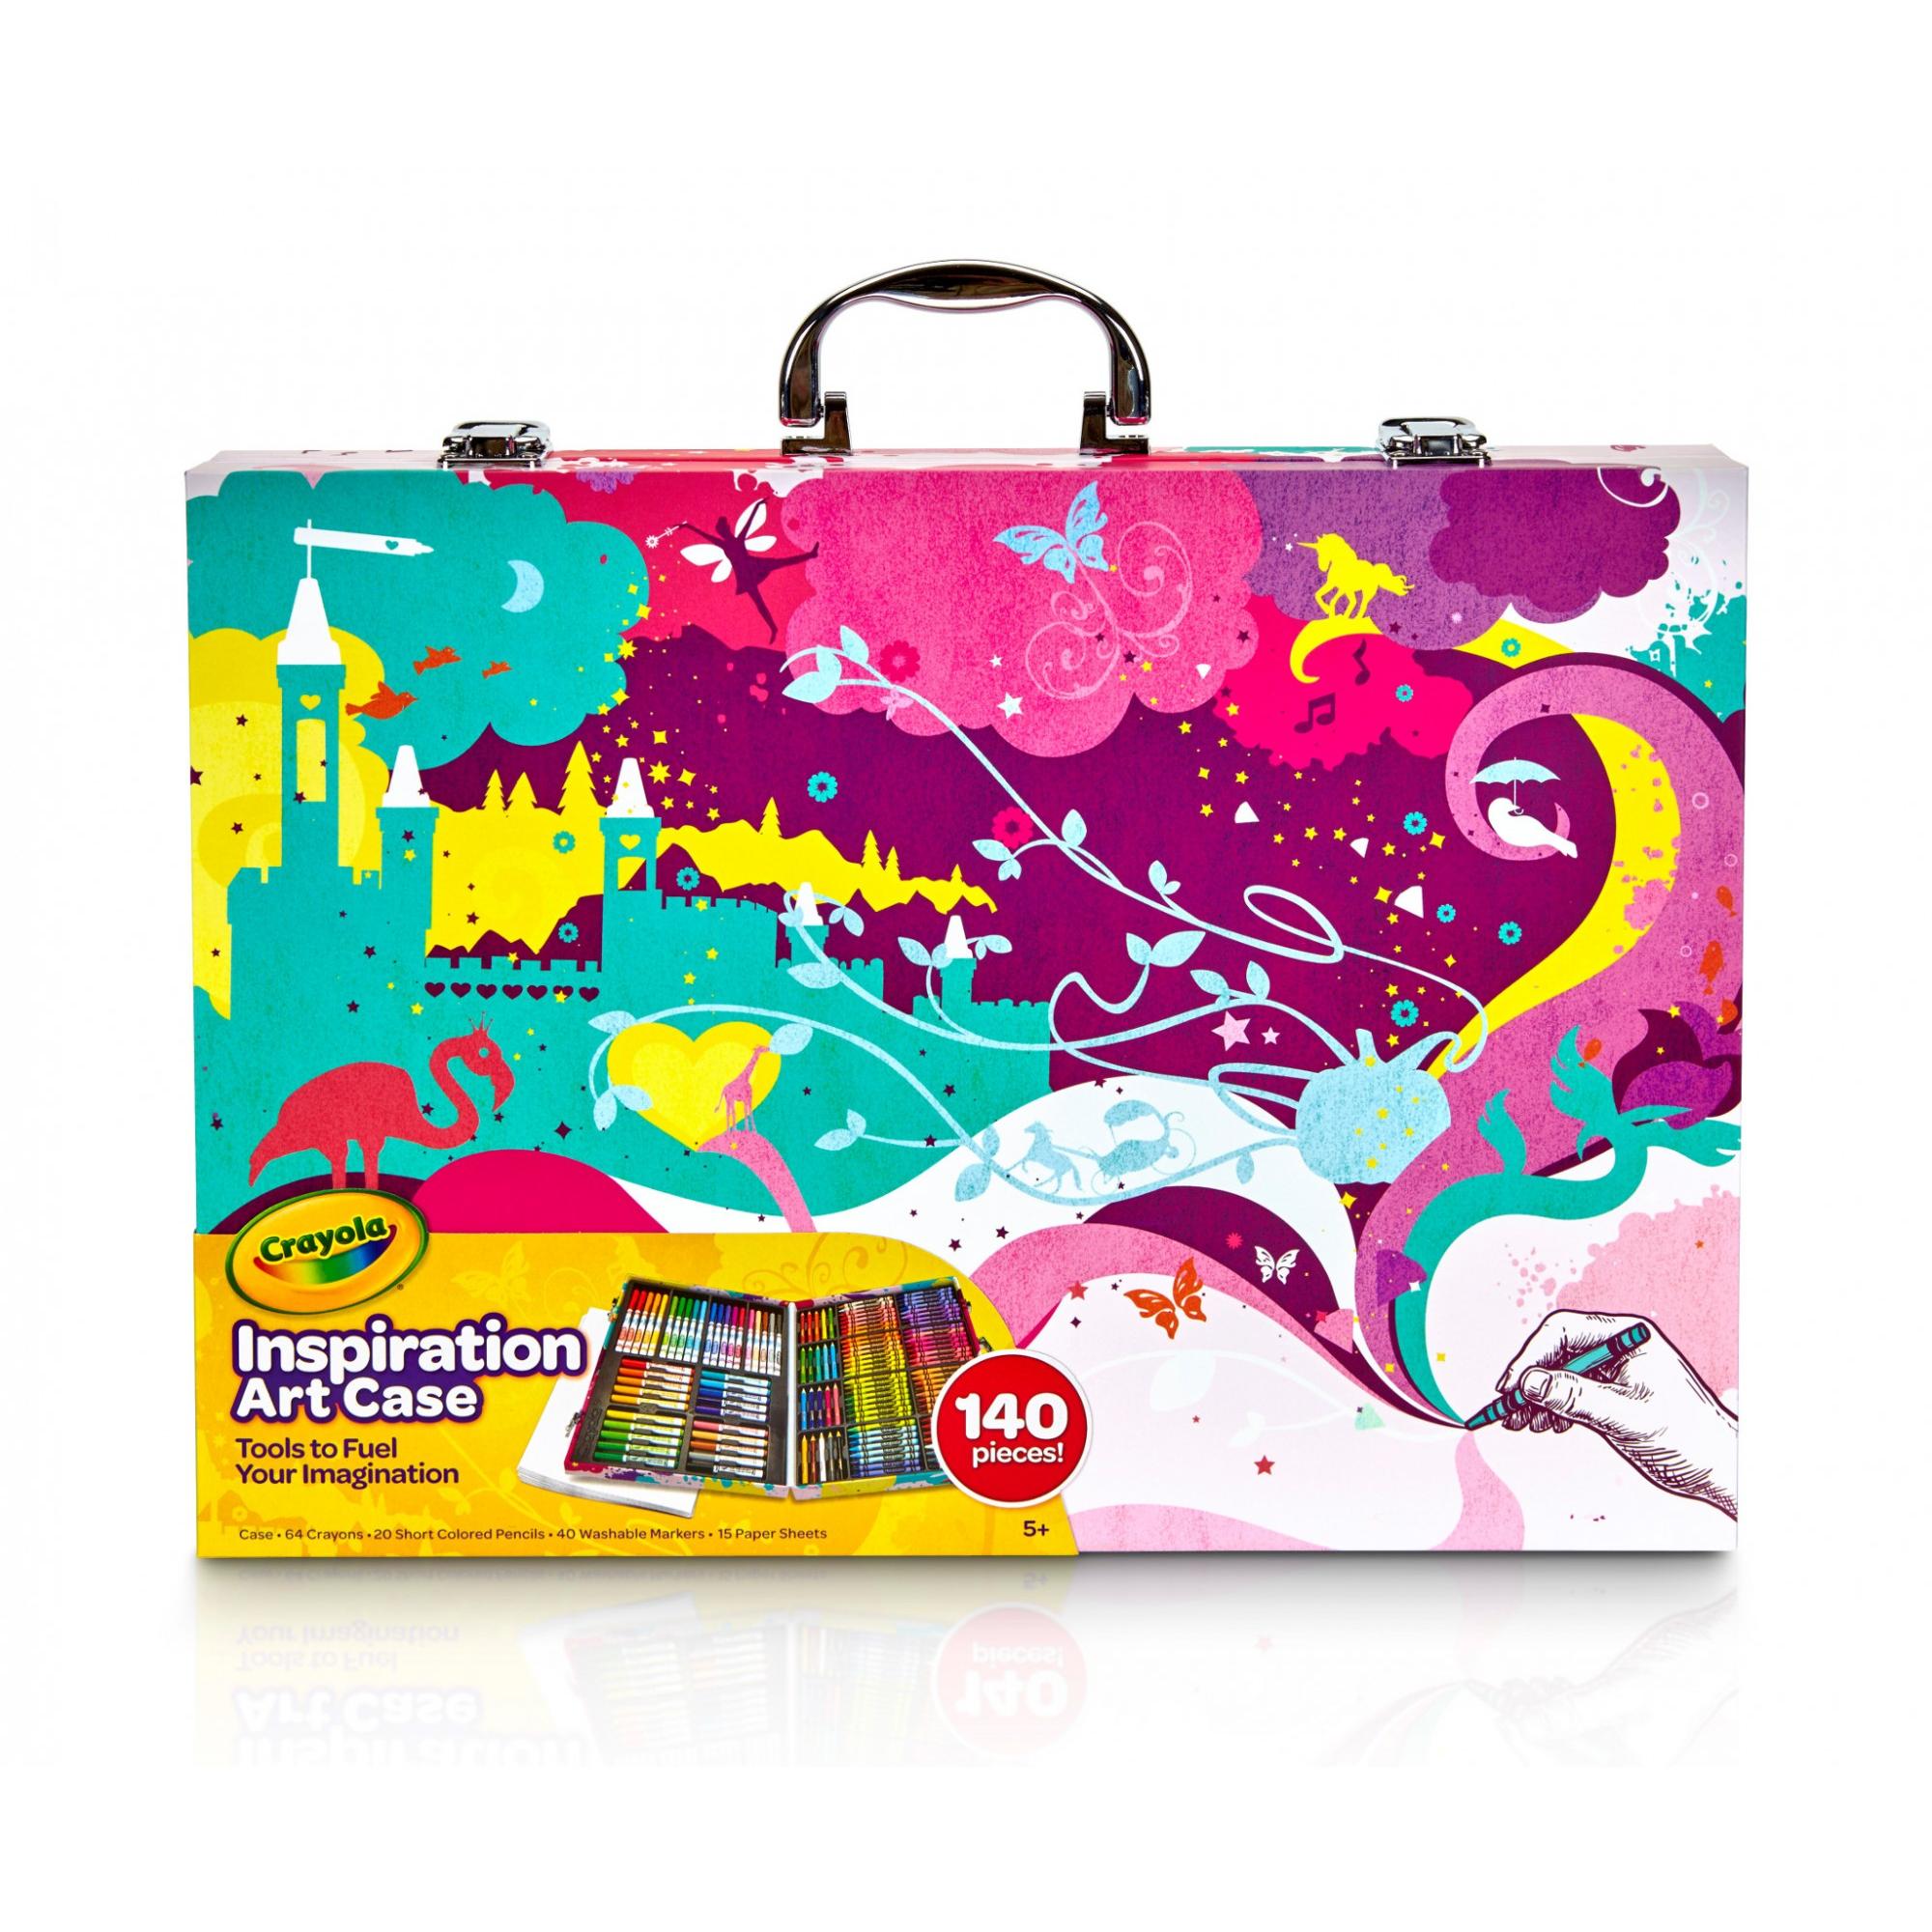 Crayola Inspiration Art Case, Pink, Art Supplies, Gift For Kids, 140 Pieces - image 2 of 11